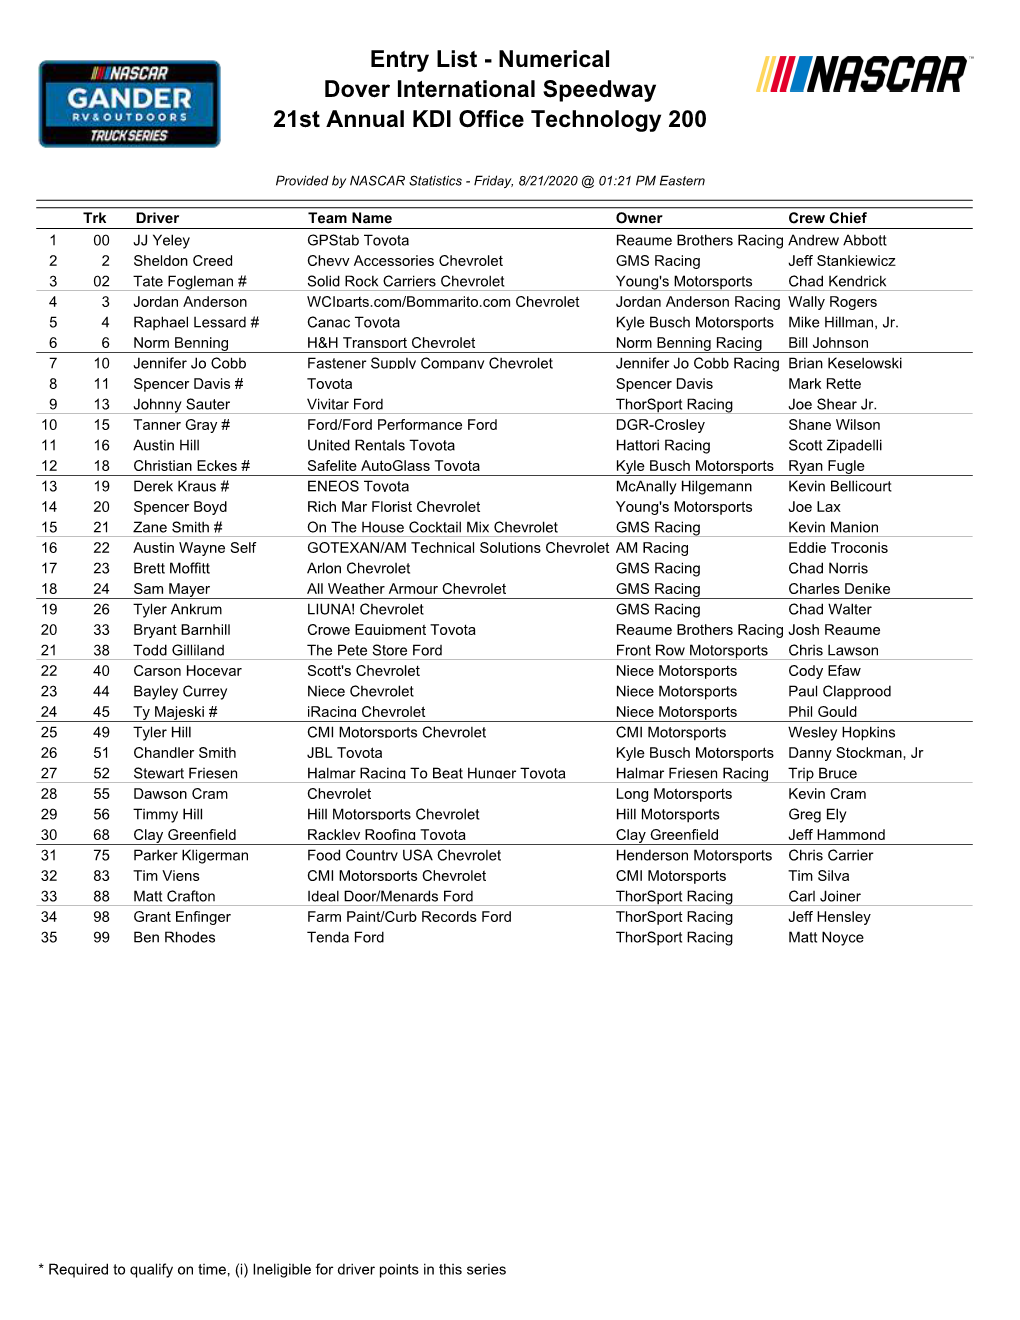 Entry List - Numerical Dover International Speedway 21St Annual KDI Office Technology 200